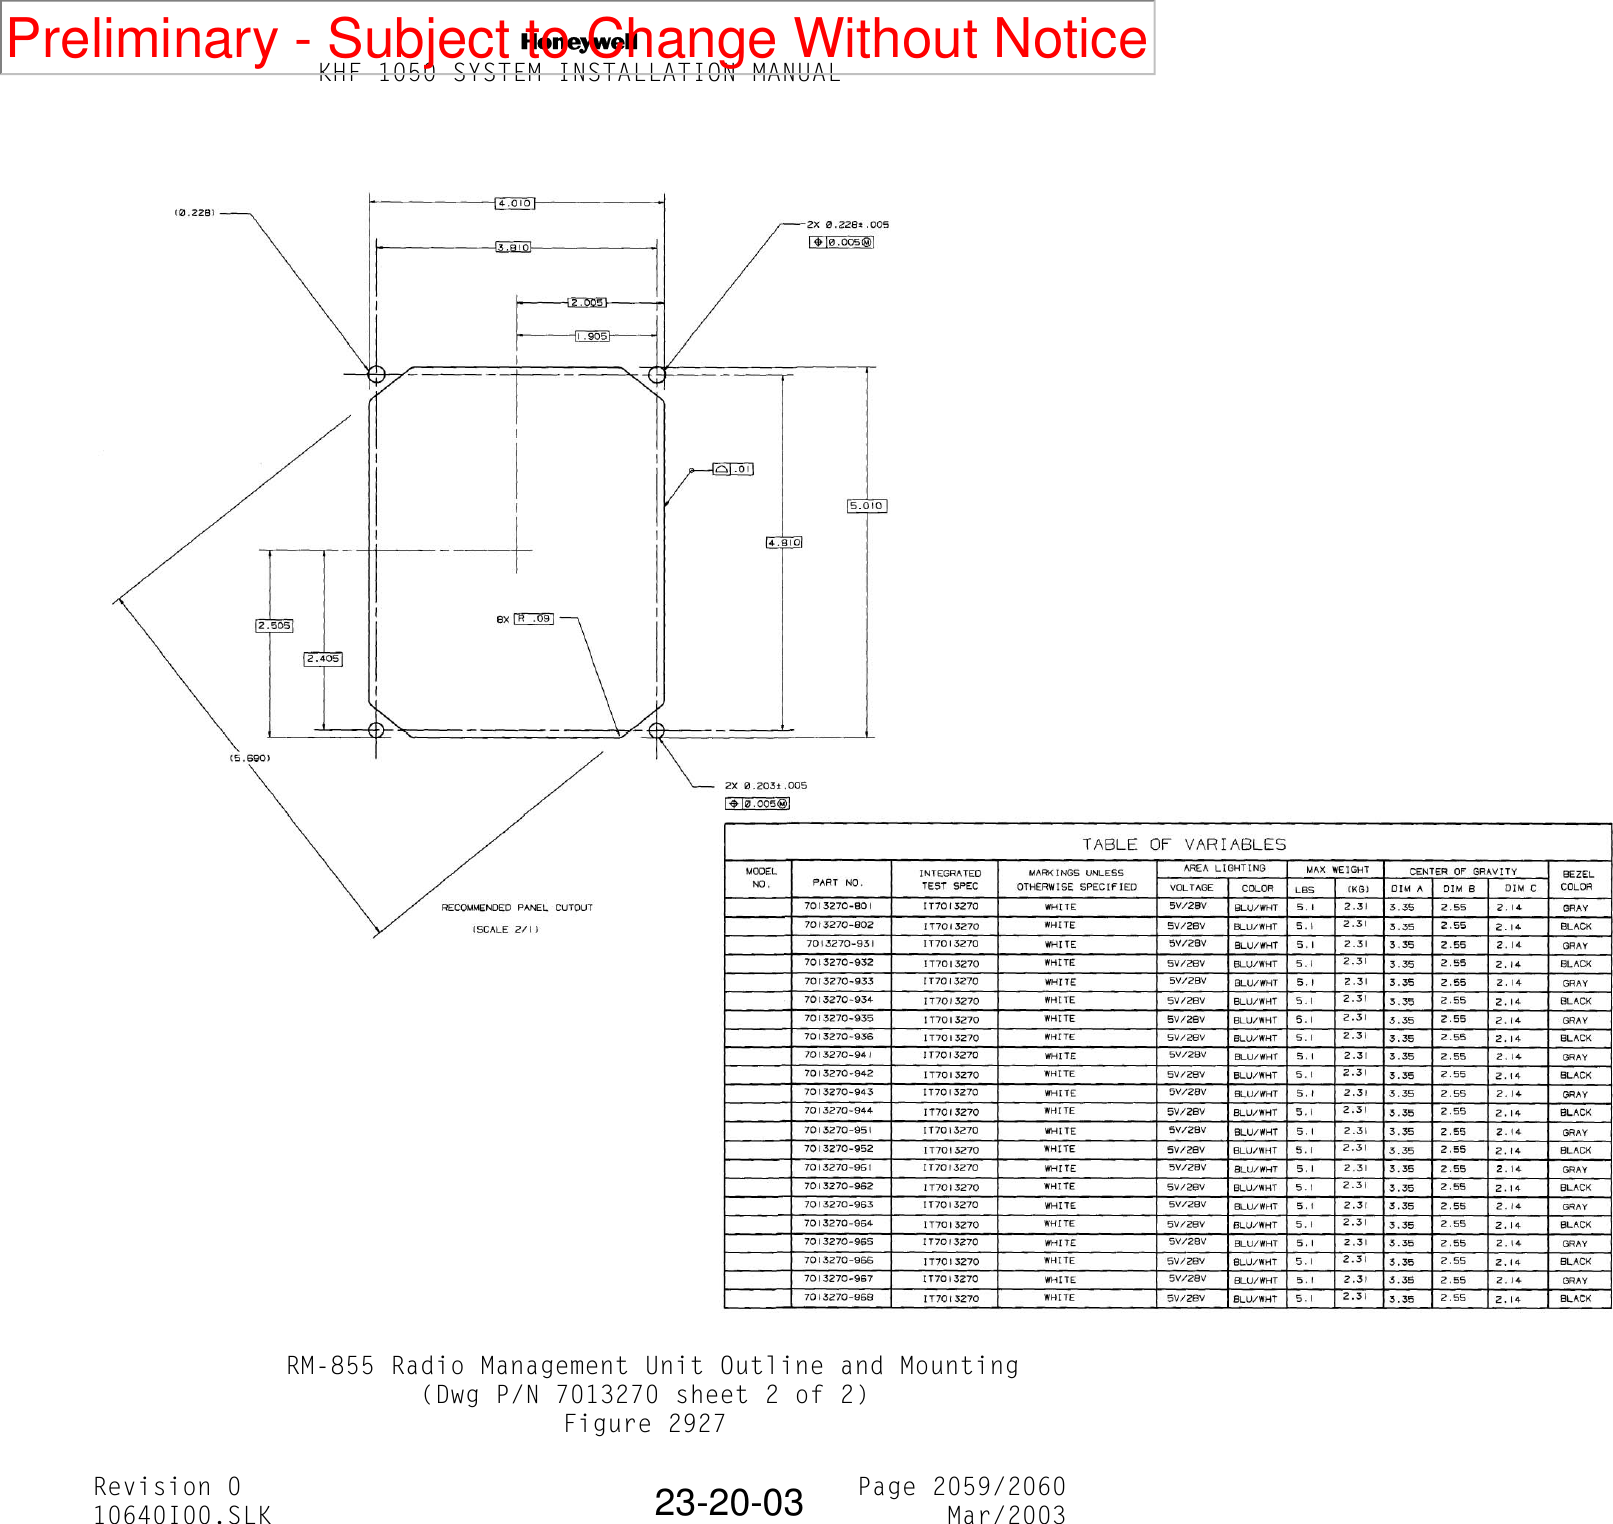 NKHF 1050 SYSTEM INSTALLATION MANUALRevision 0 Page 2059/206010640I00.SLK Mar/200323-20-03 RM-855 Radio Management Unit Outline and Mounting(Dwg P/N 7013270 sheet 2 of 2)Figure 2927Preliminary - Subject to Change Without Notice